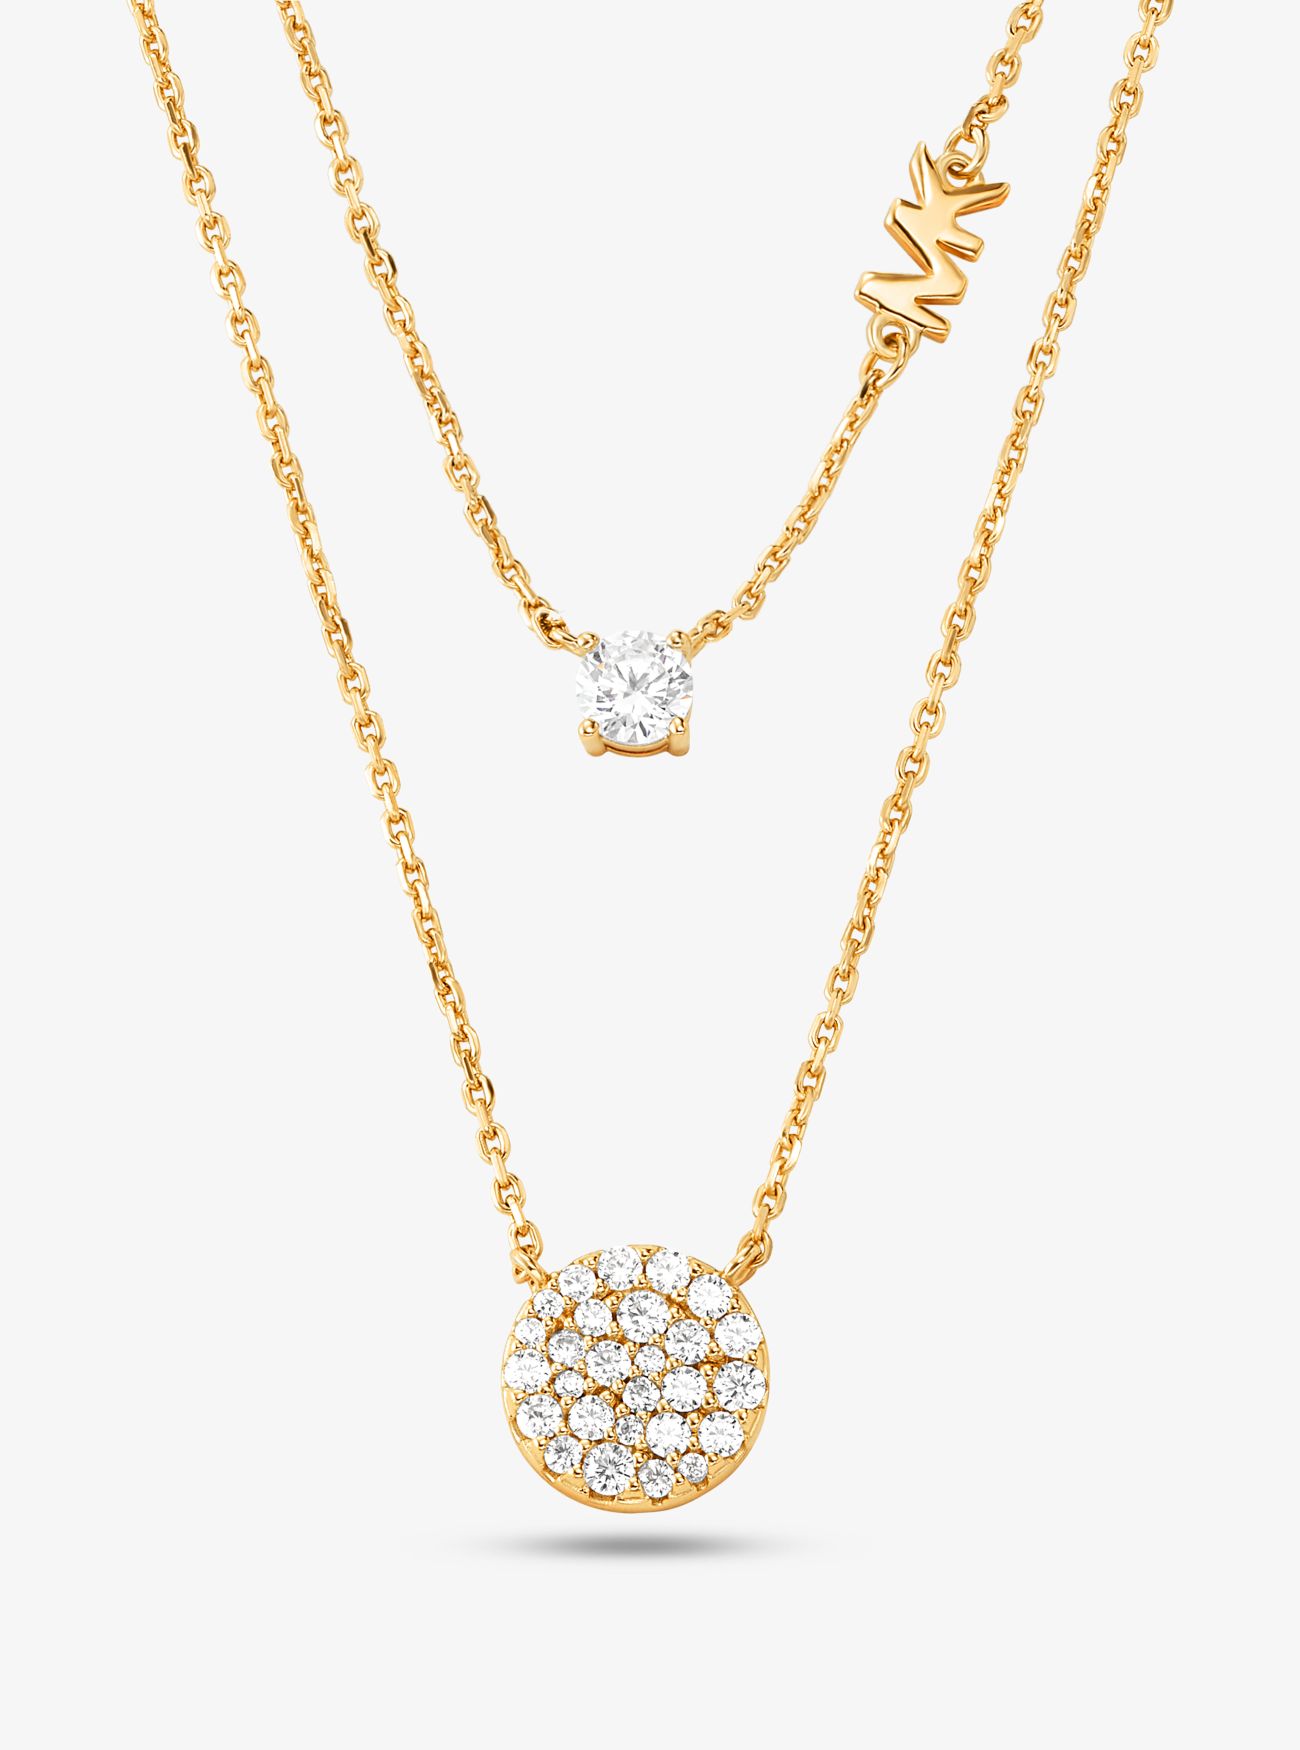 MK Precious Metal-Plated Sterling Silver PavÃ© Disc Layering Necklace - Gold - Michael Kors